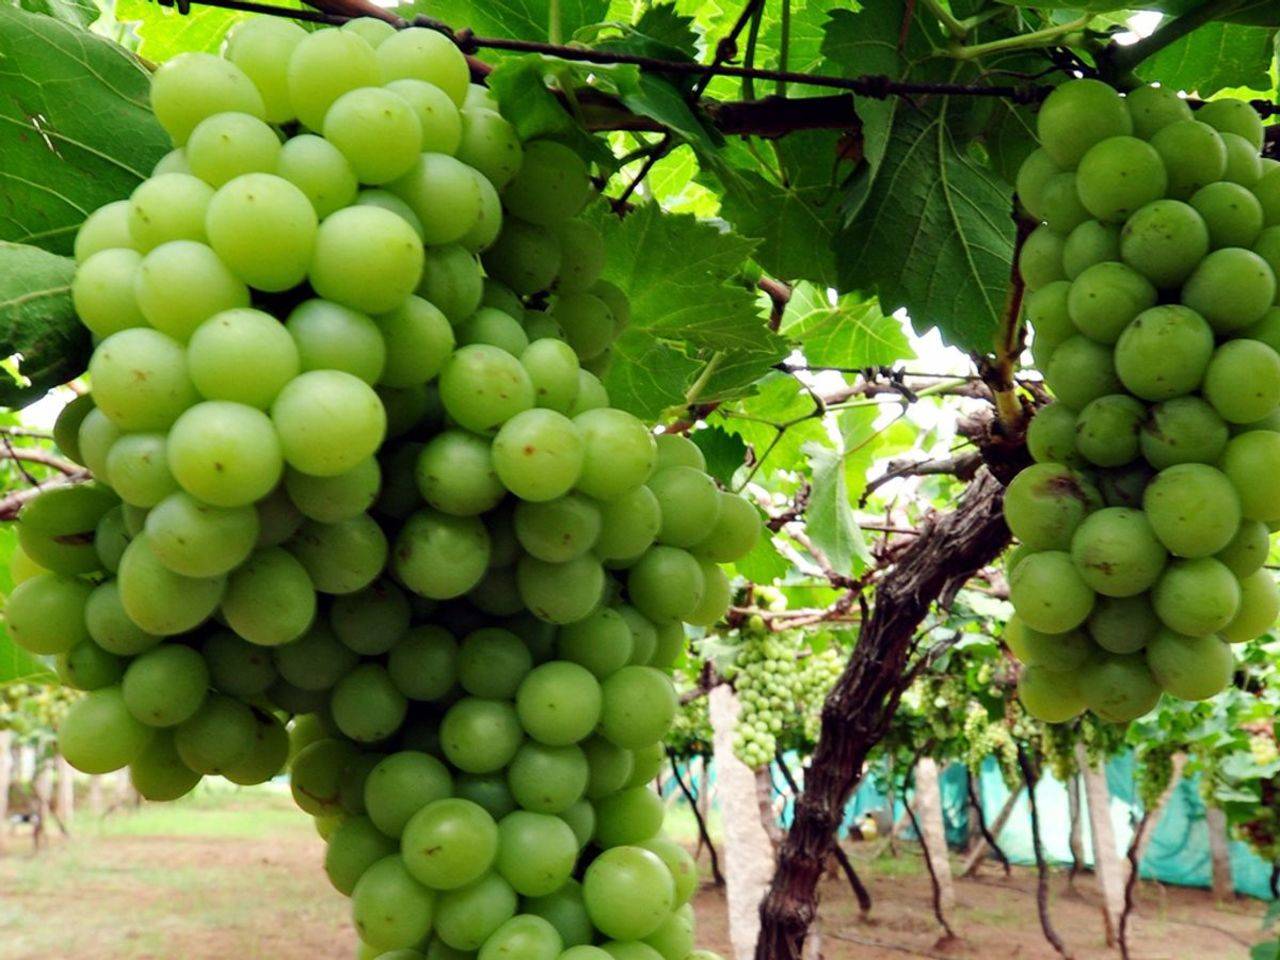 With grapes yet to be harvested, farmers could transform ripe ...